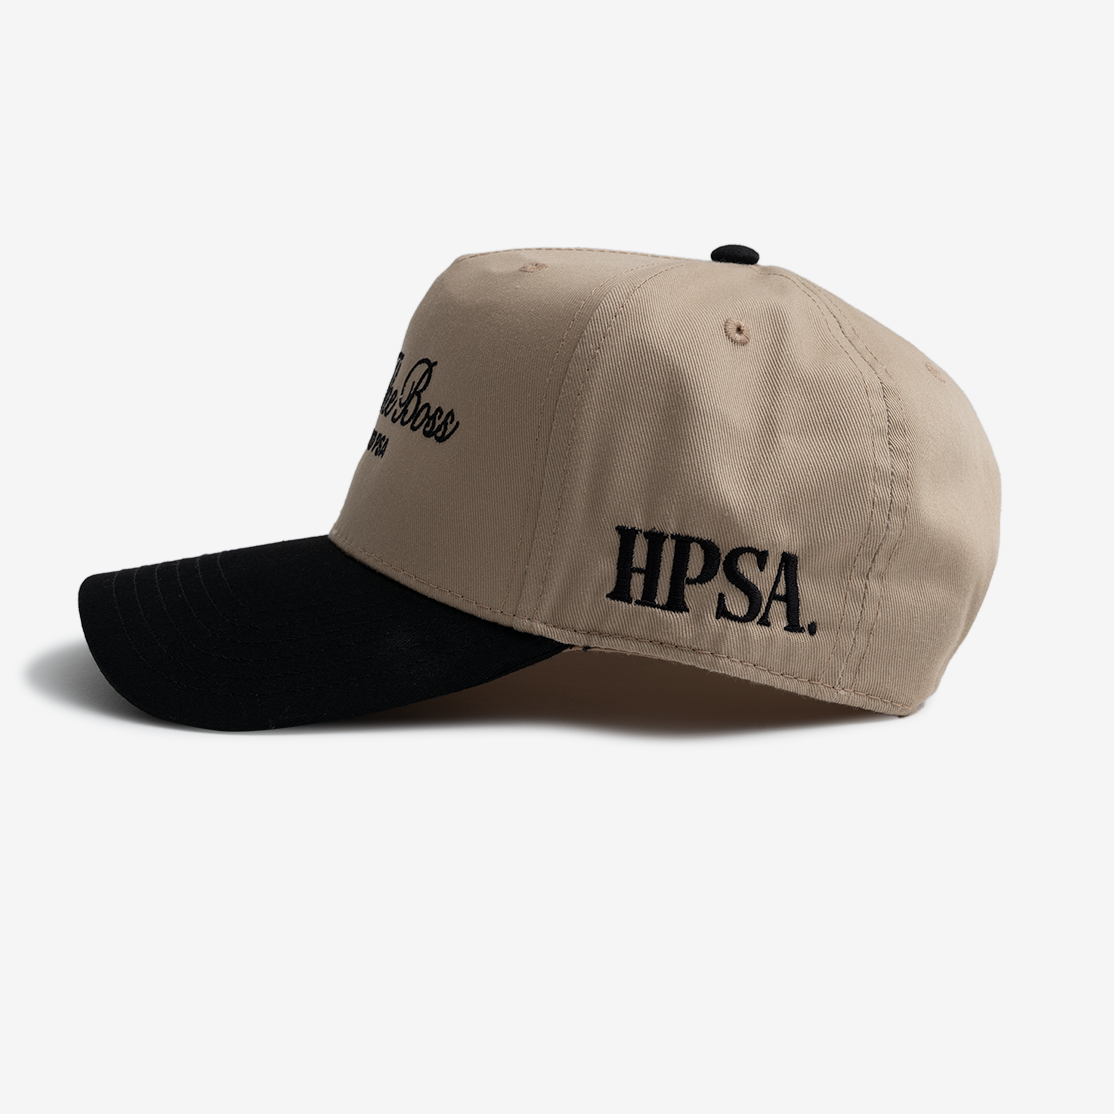 She's The Boss Hat (Brown/Black)